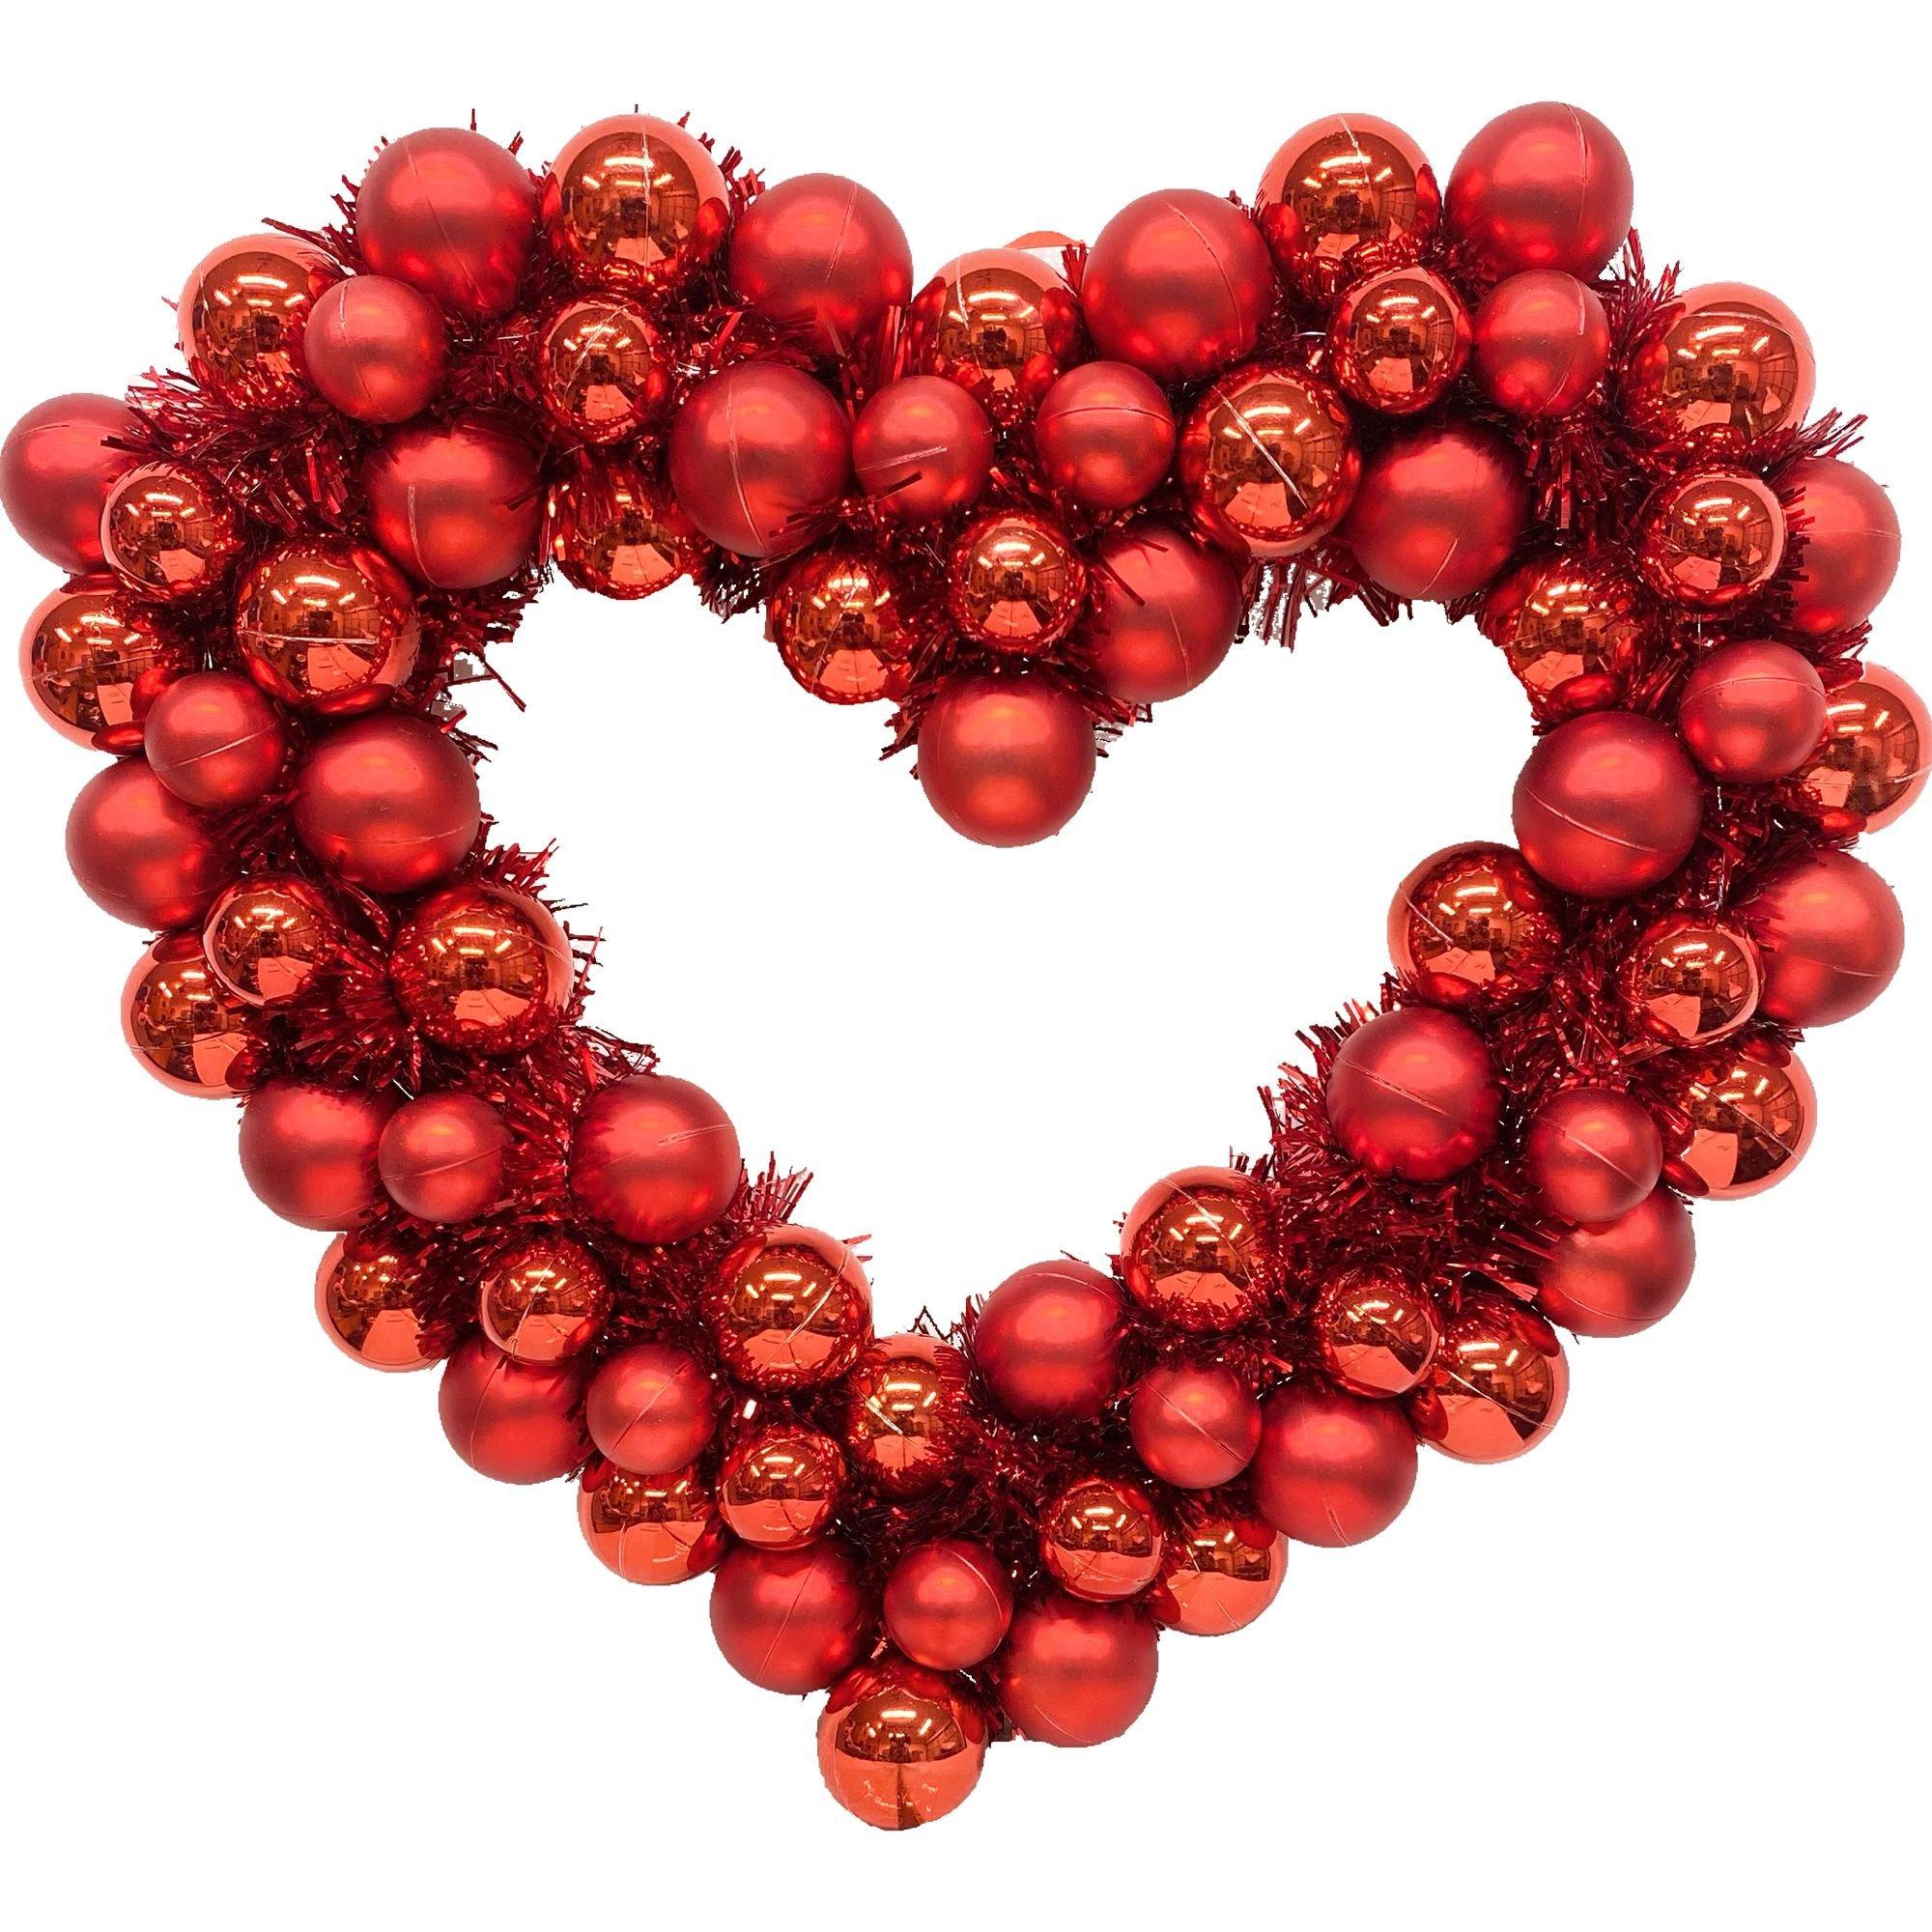 Show Your Love With This Valentine's Day Mickey Shaped Wreath - Decor 